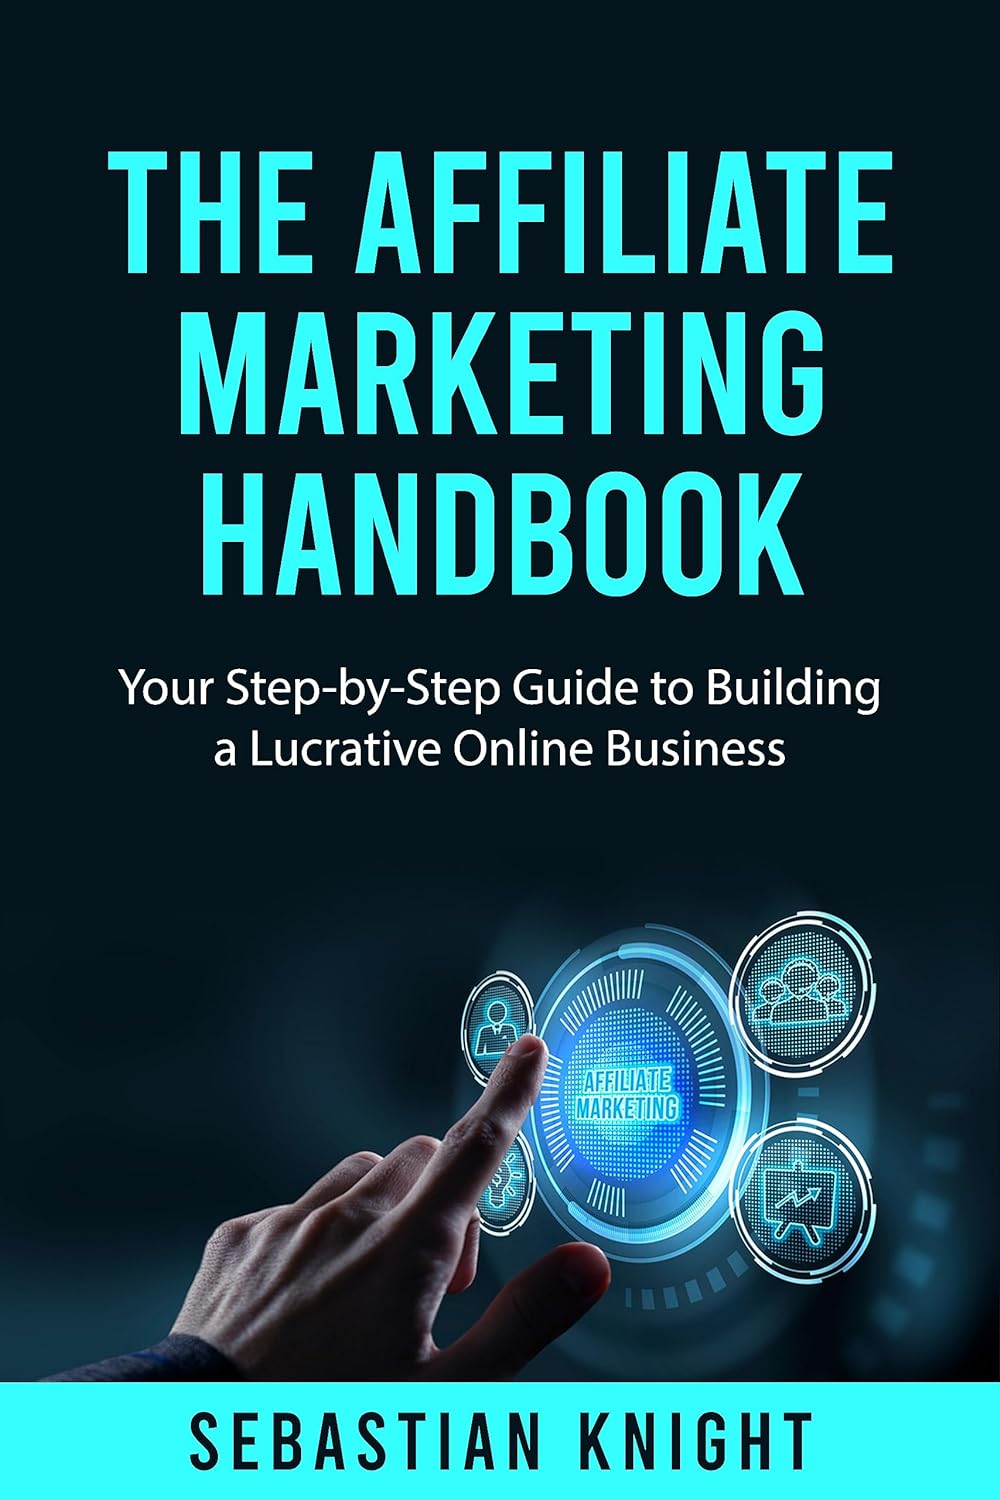 The Affiliate Marketing Handbook: Your Step-by-Step Guide to Building a Lucrative Online Business (The Ultimate Online Entrepreneur) Kindle Edition